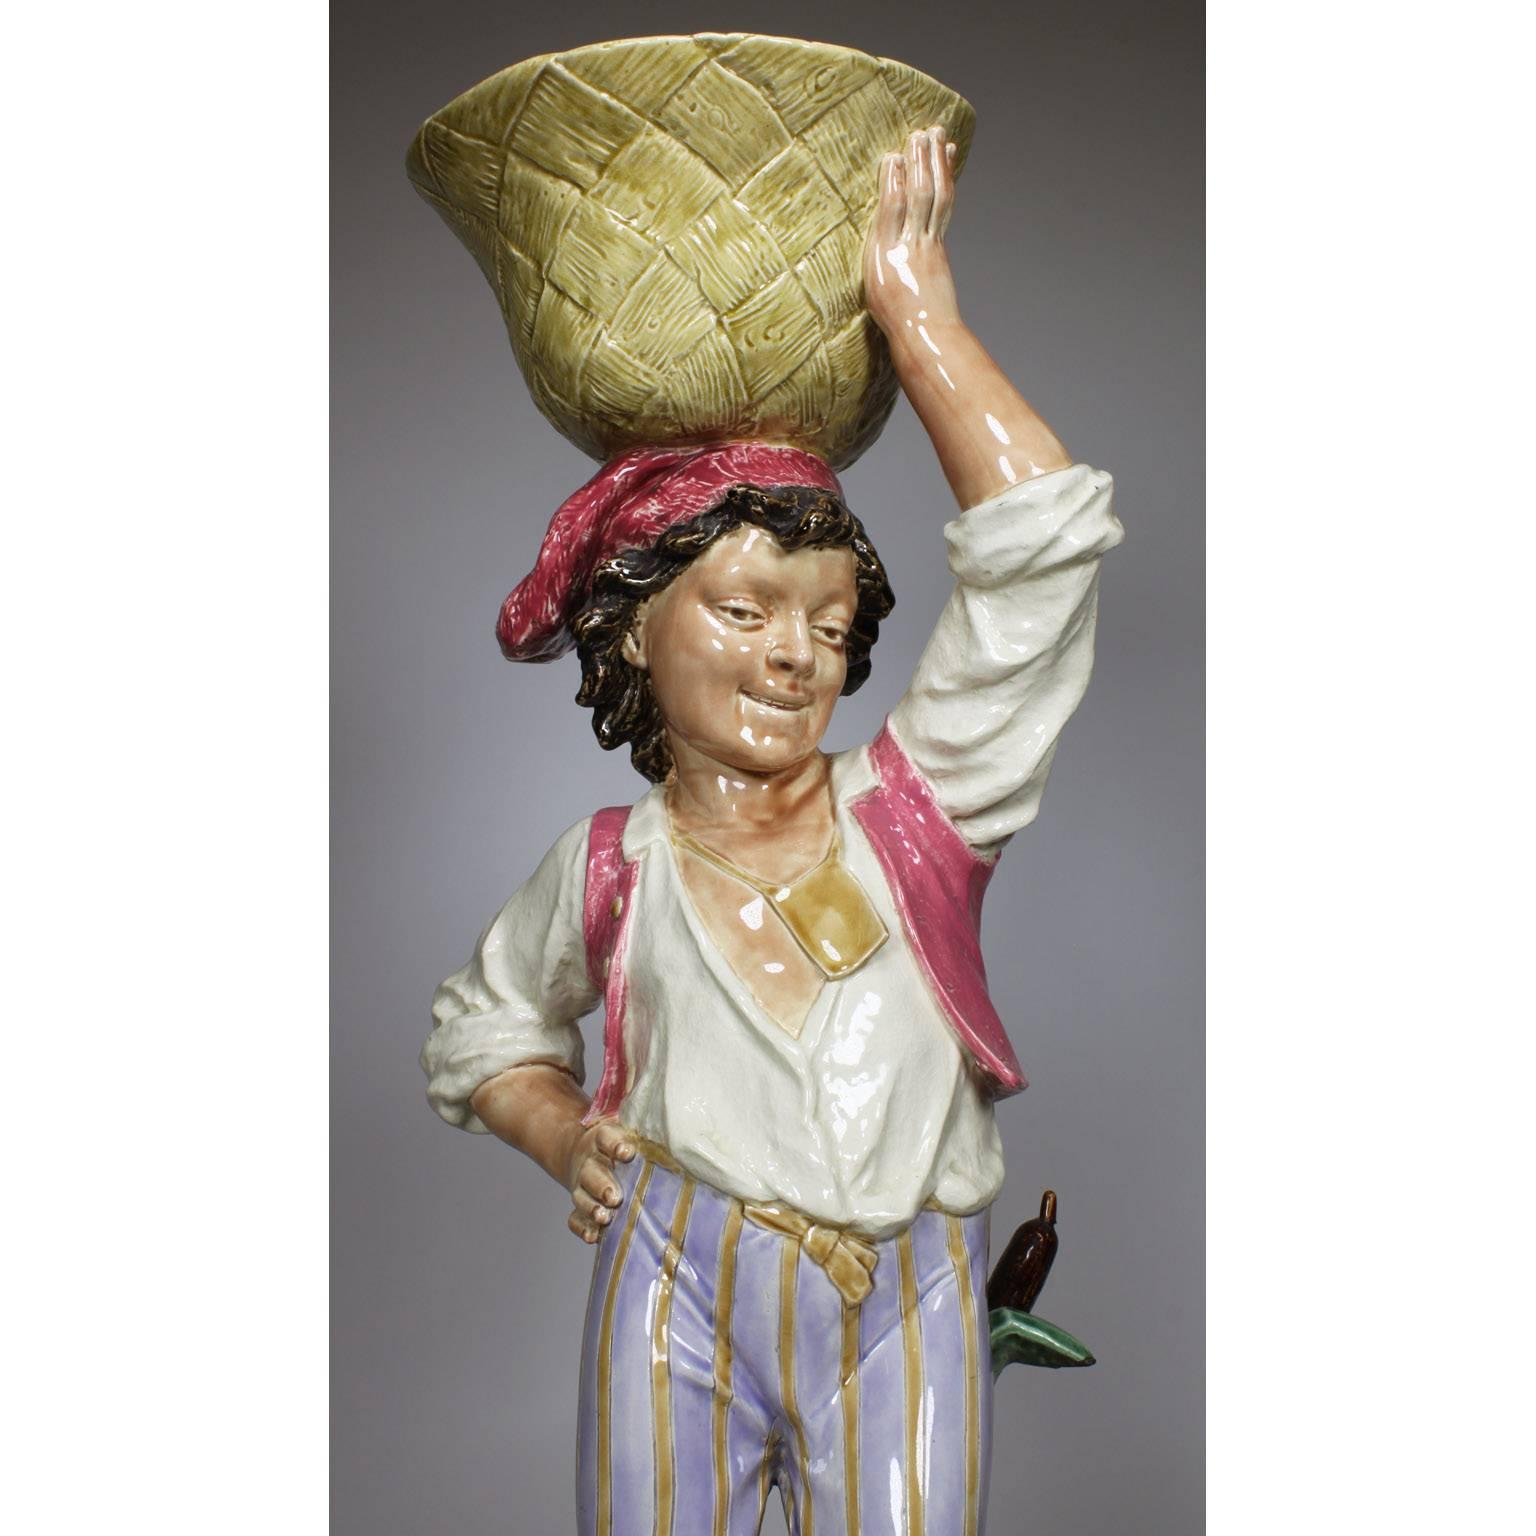 A French late 19th century Majolica figural jardinière (planter) modeled as a young Neapolitan vintner boy balancing a weaved basket over his head, standing on the back of a tortoise on a rocky base amongst bulrushes. Mark for Choisy-Le Roy, H.